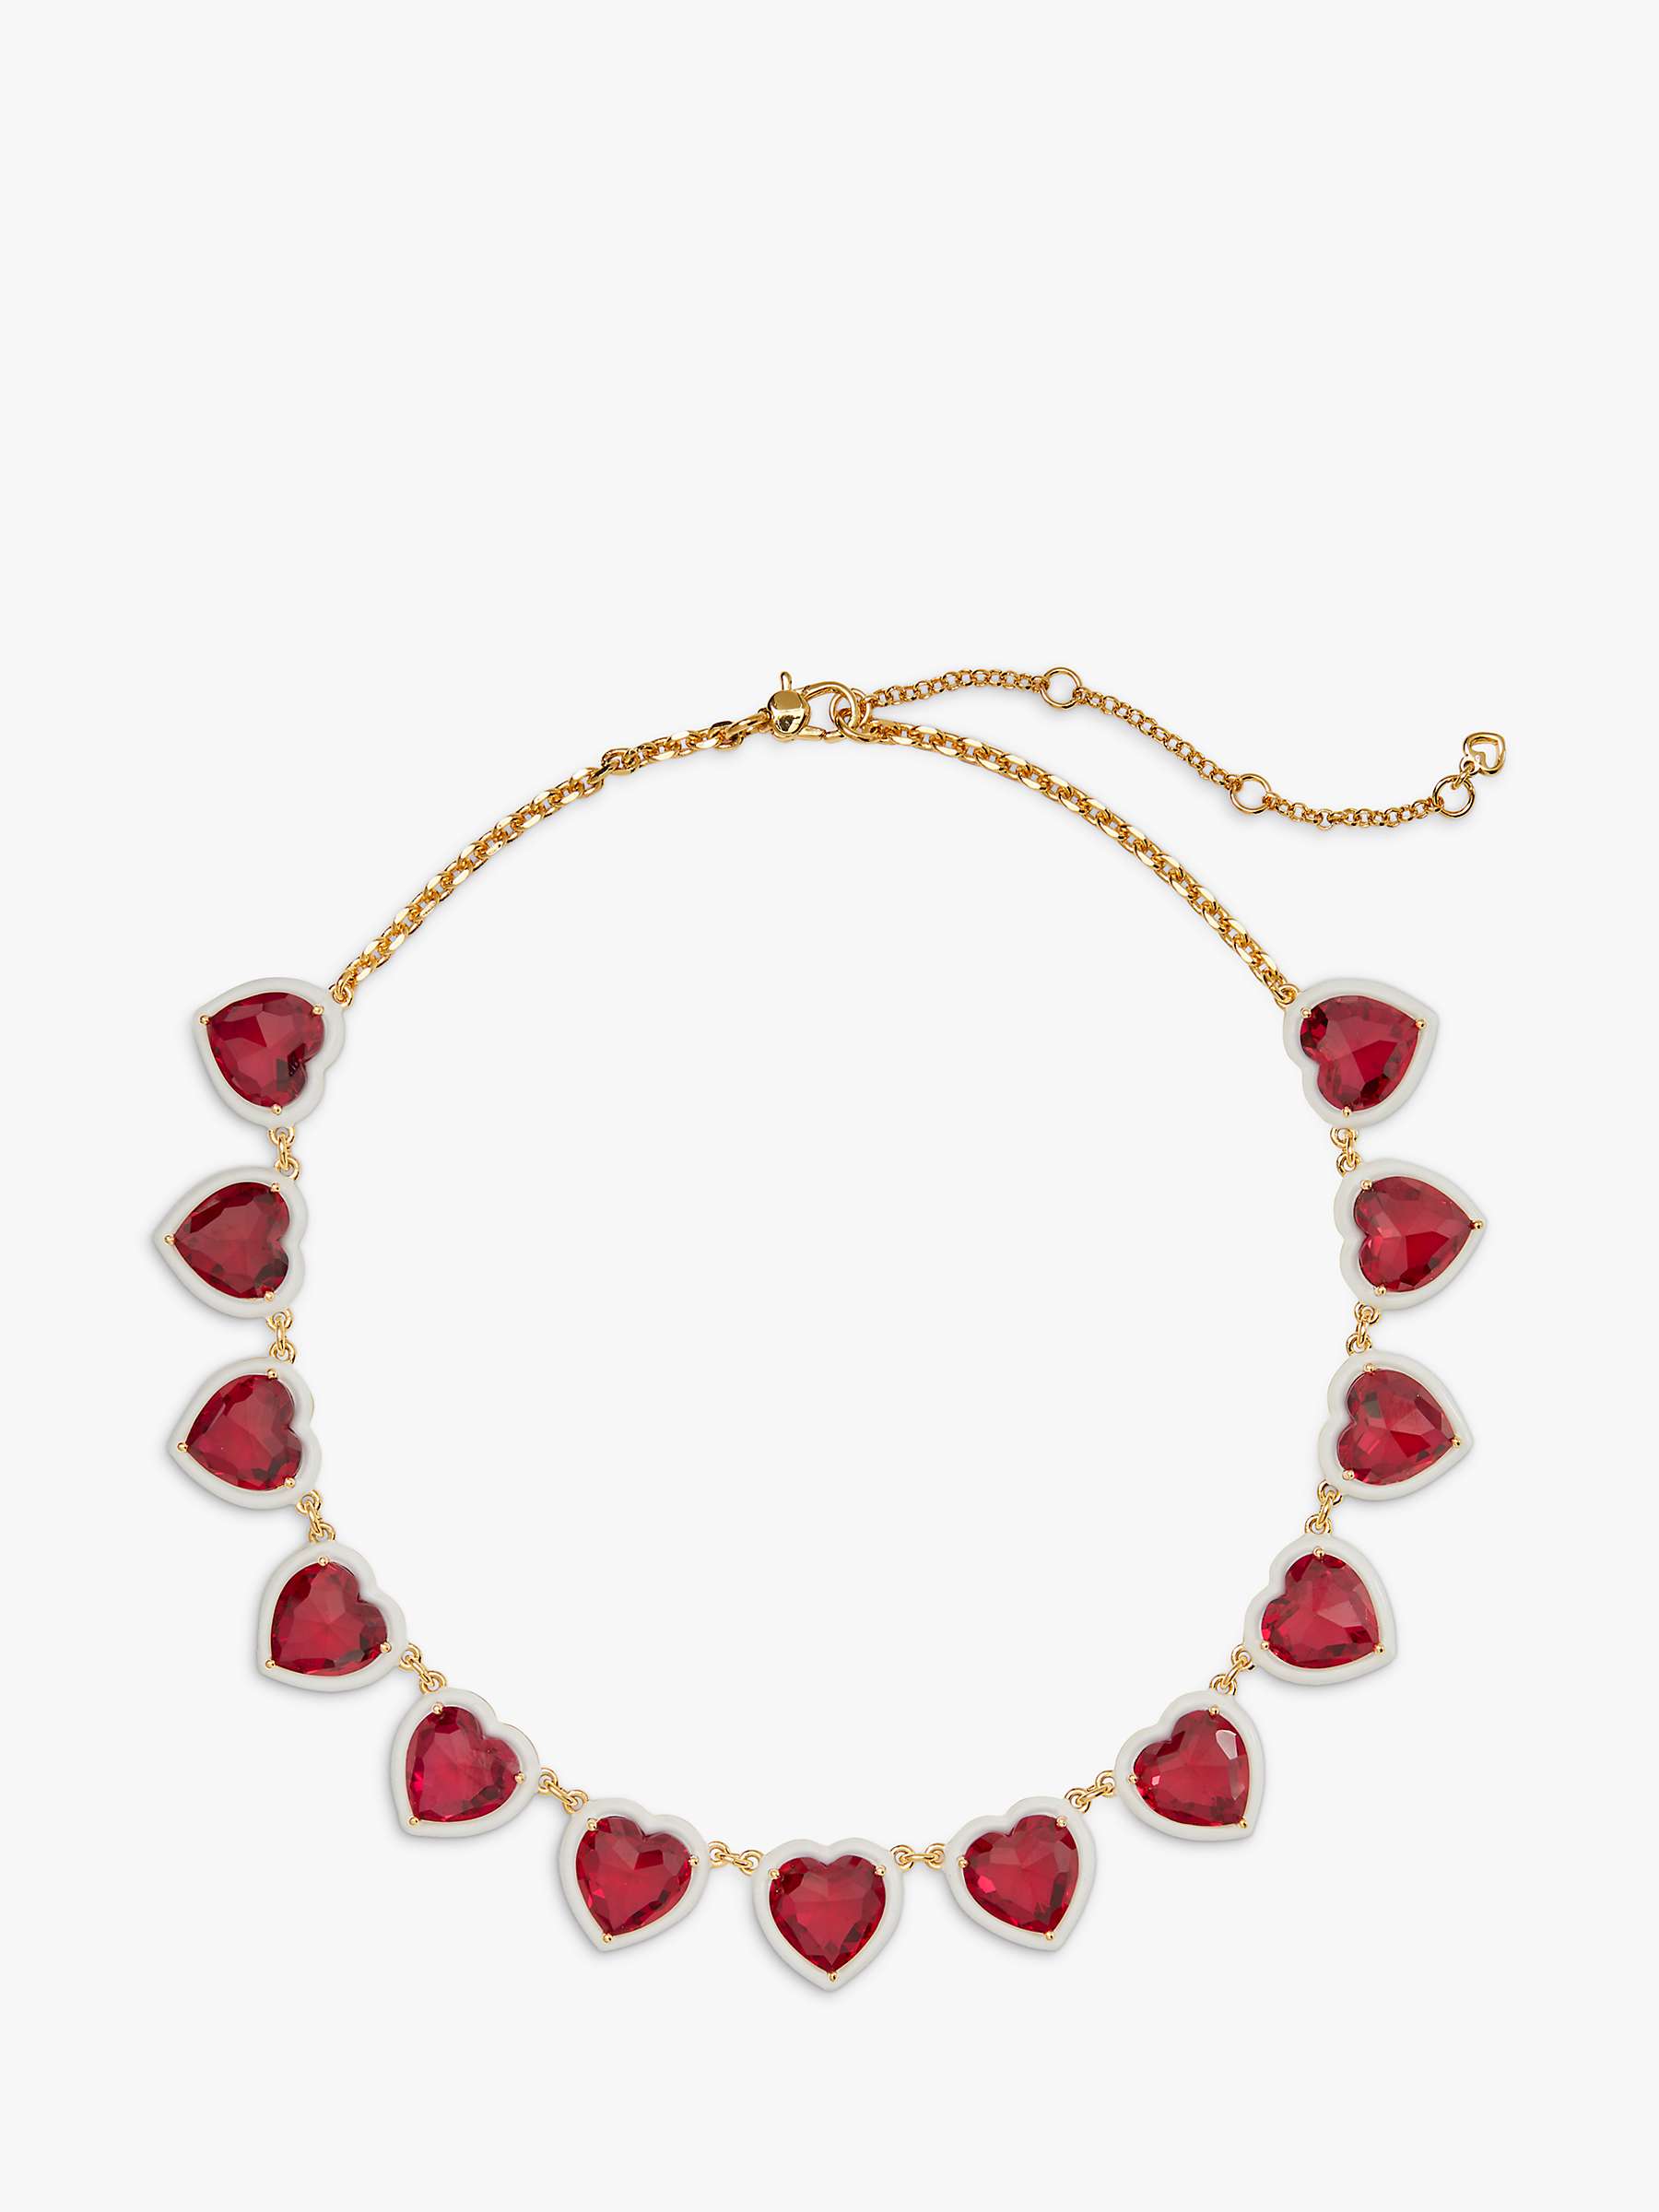 Buy kate spade new york Crystal Heart Statement Necklace, Red/Multi Online at johnlewis.com